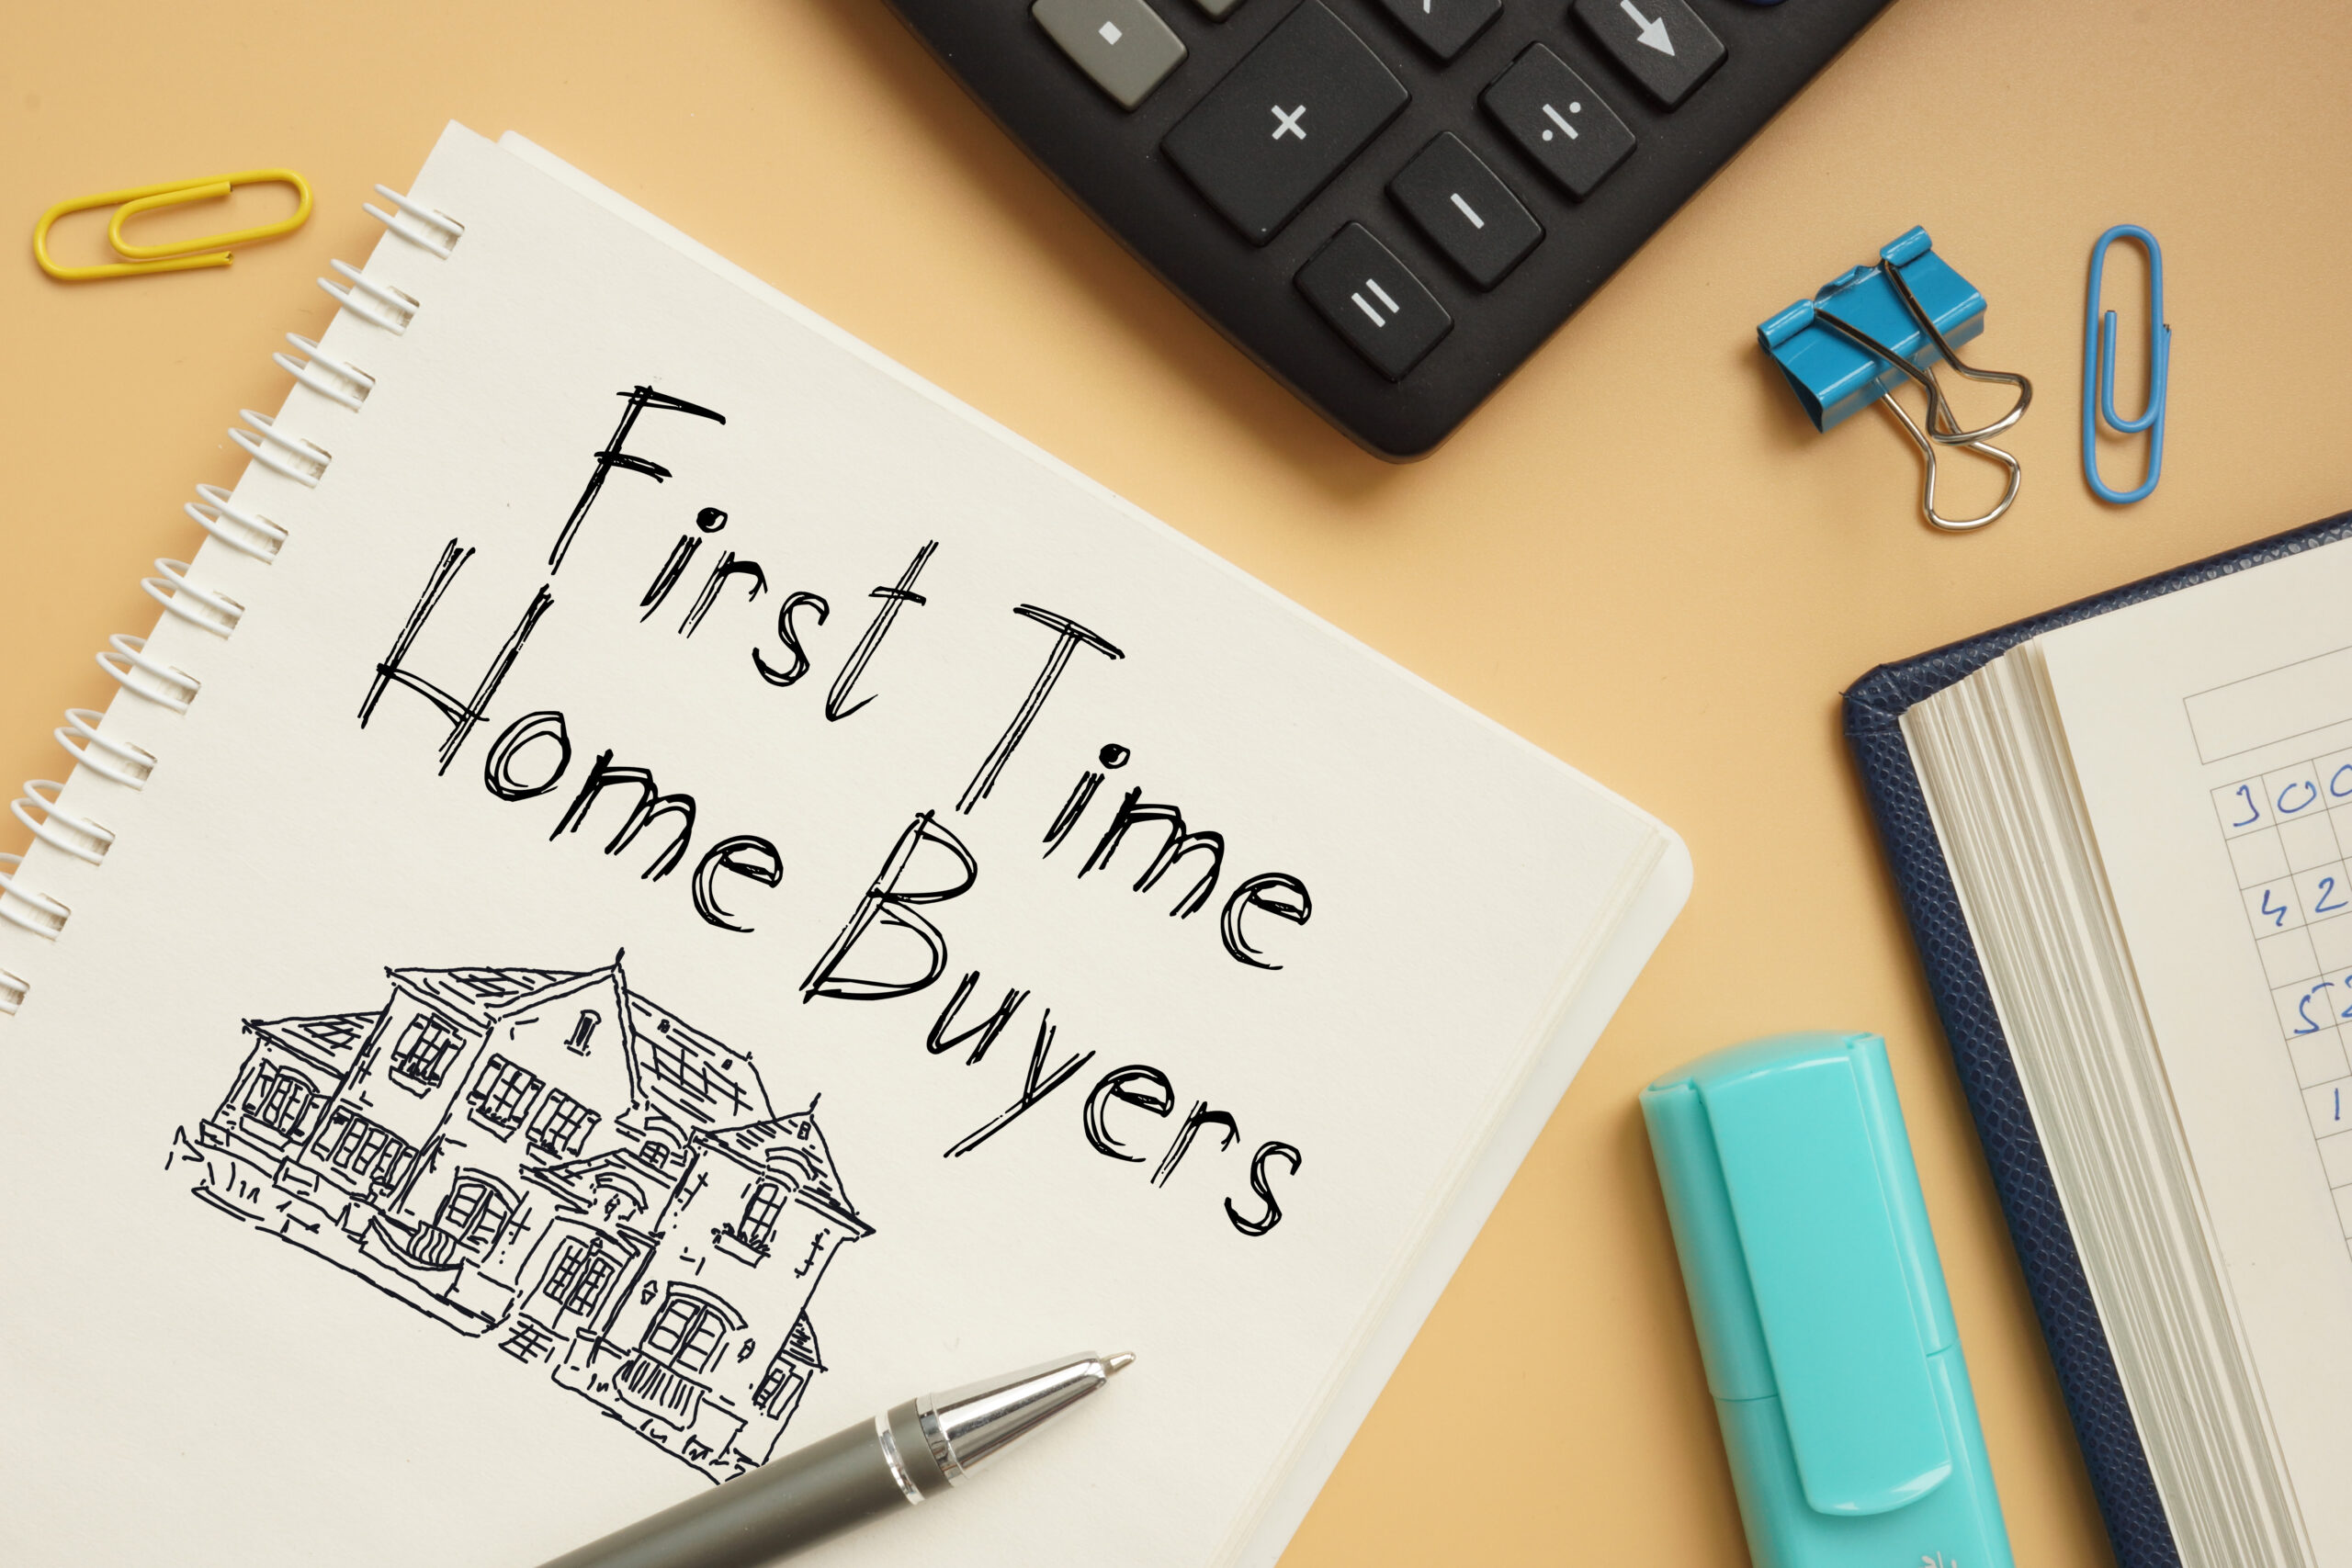 First time home buyers are shown on a business photo using the text